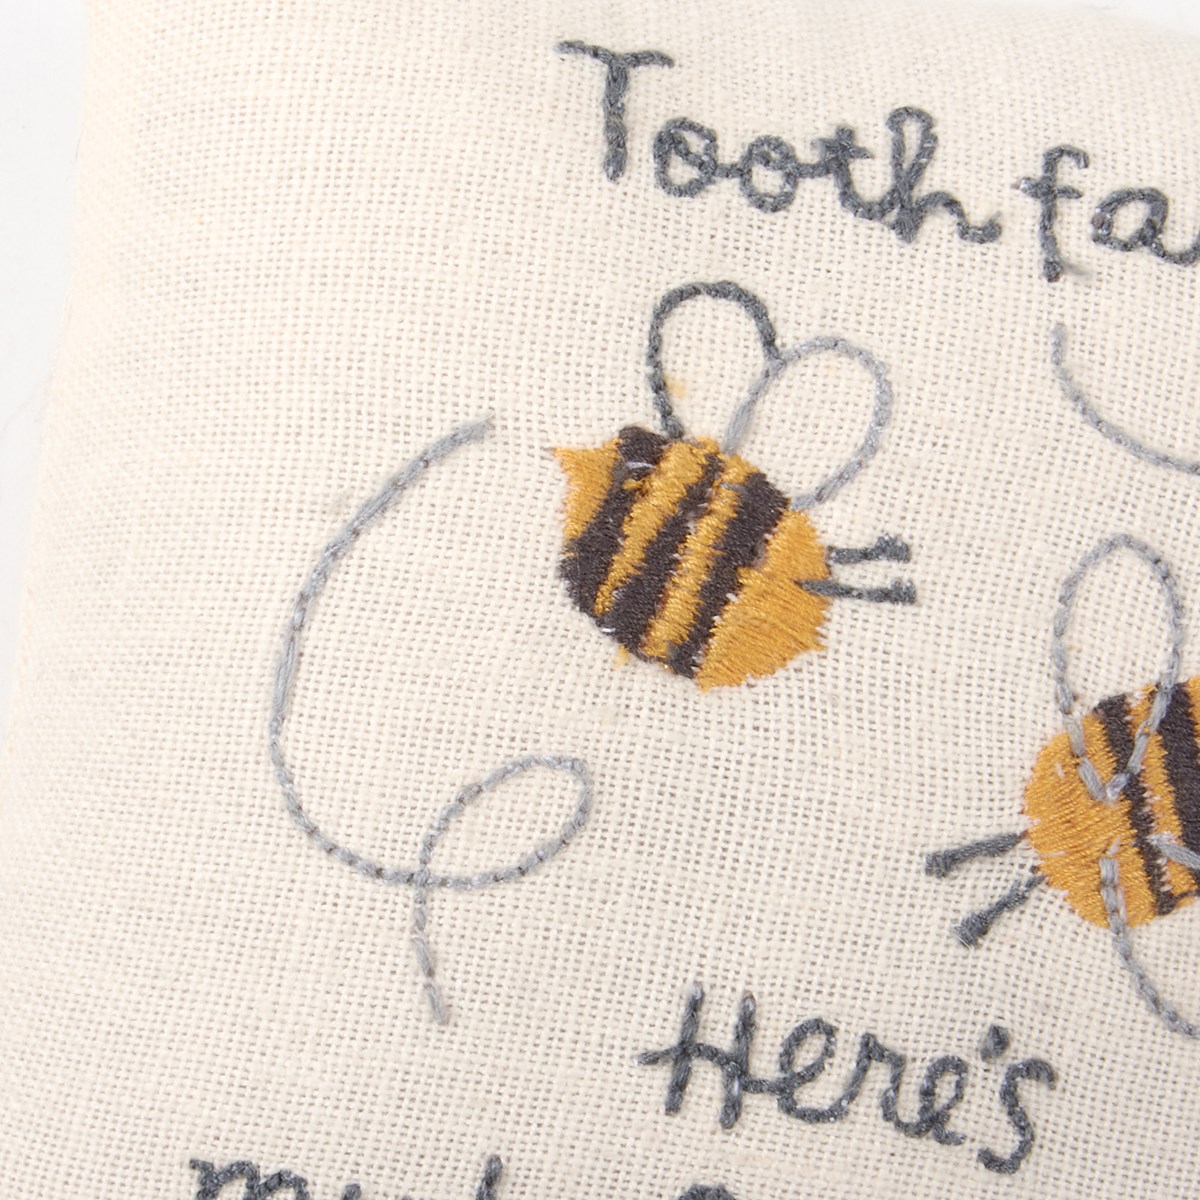 My Babee Tooth Fairy Pillow - Cotton, Linen